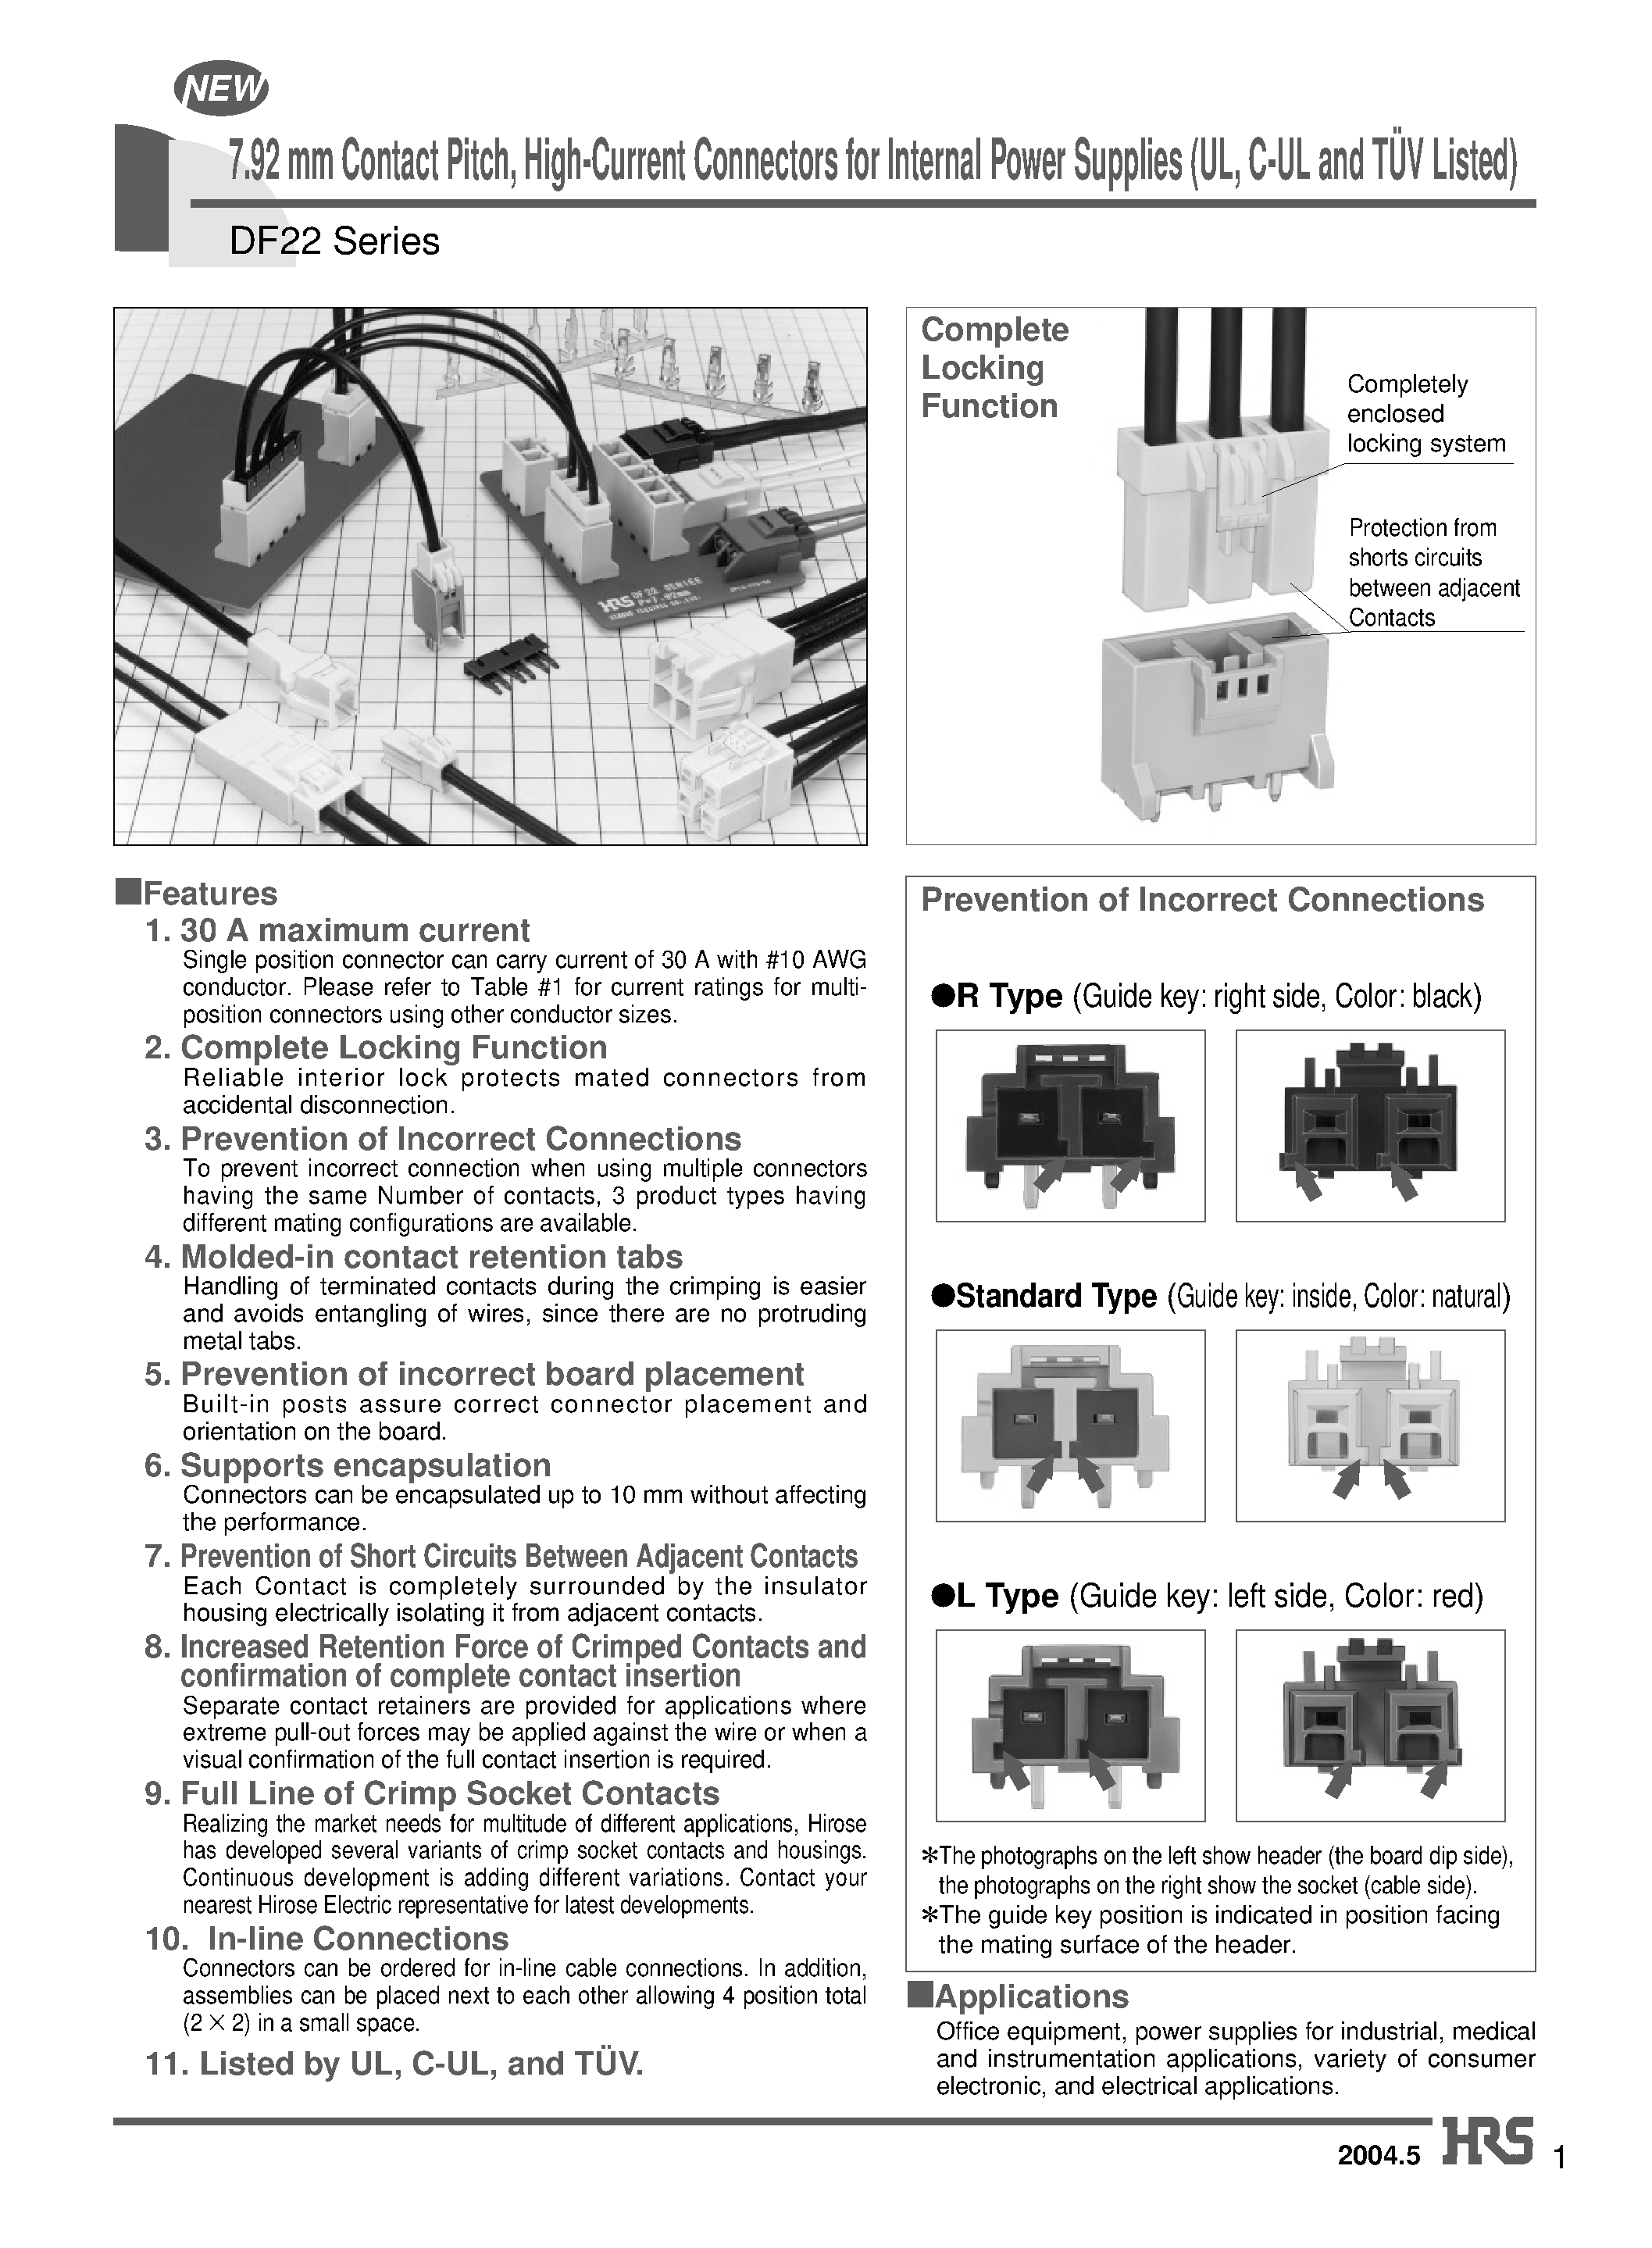 Datasheet DF22-1EP-7.92DSA - 7.92 mm Contact Pitch/ High-Current Connectors for Internal Power Supplies (UL/ C-UL and TUV Listed) page 1